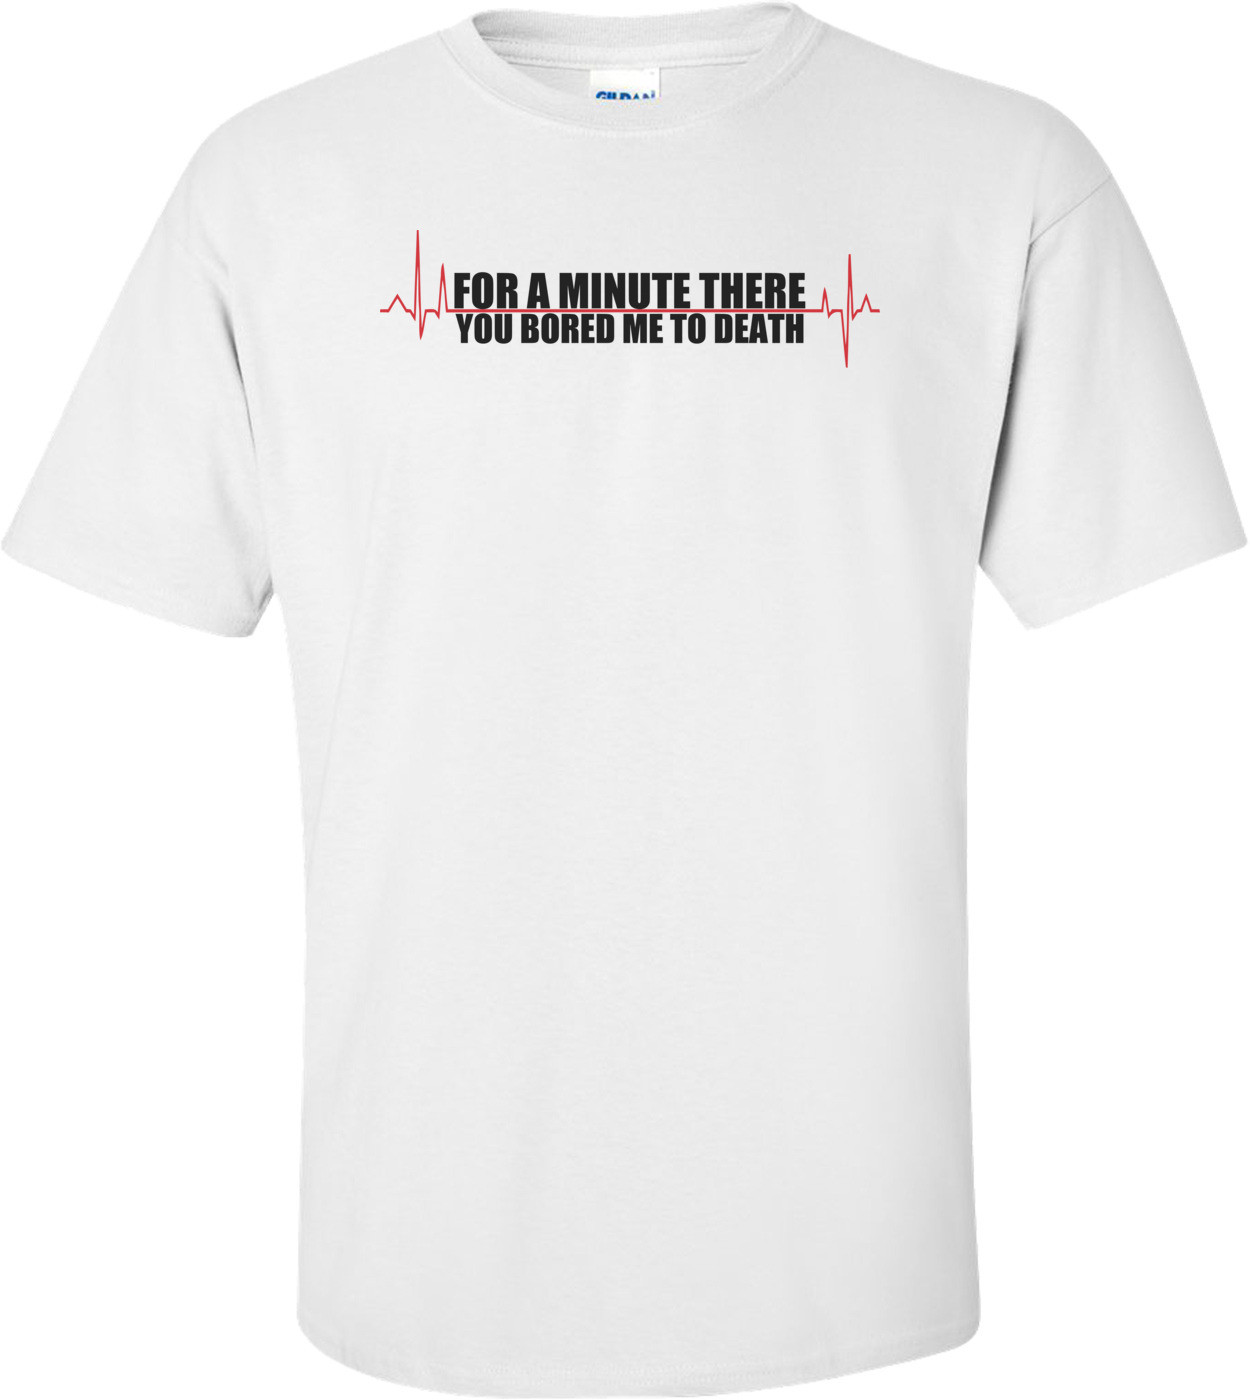 For A Minute There You Bored Me To Death T-shirt